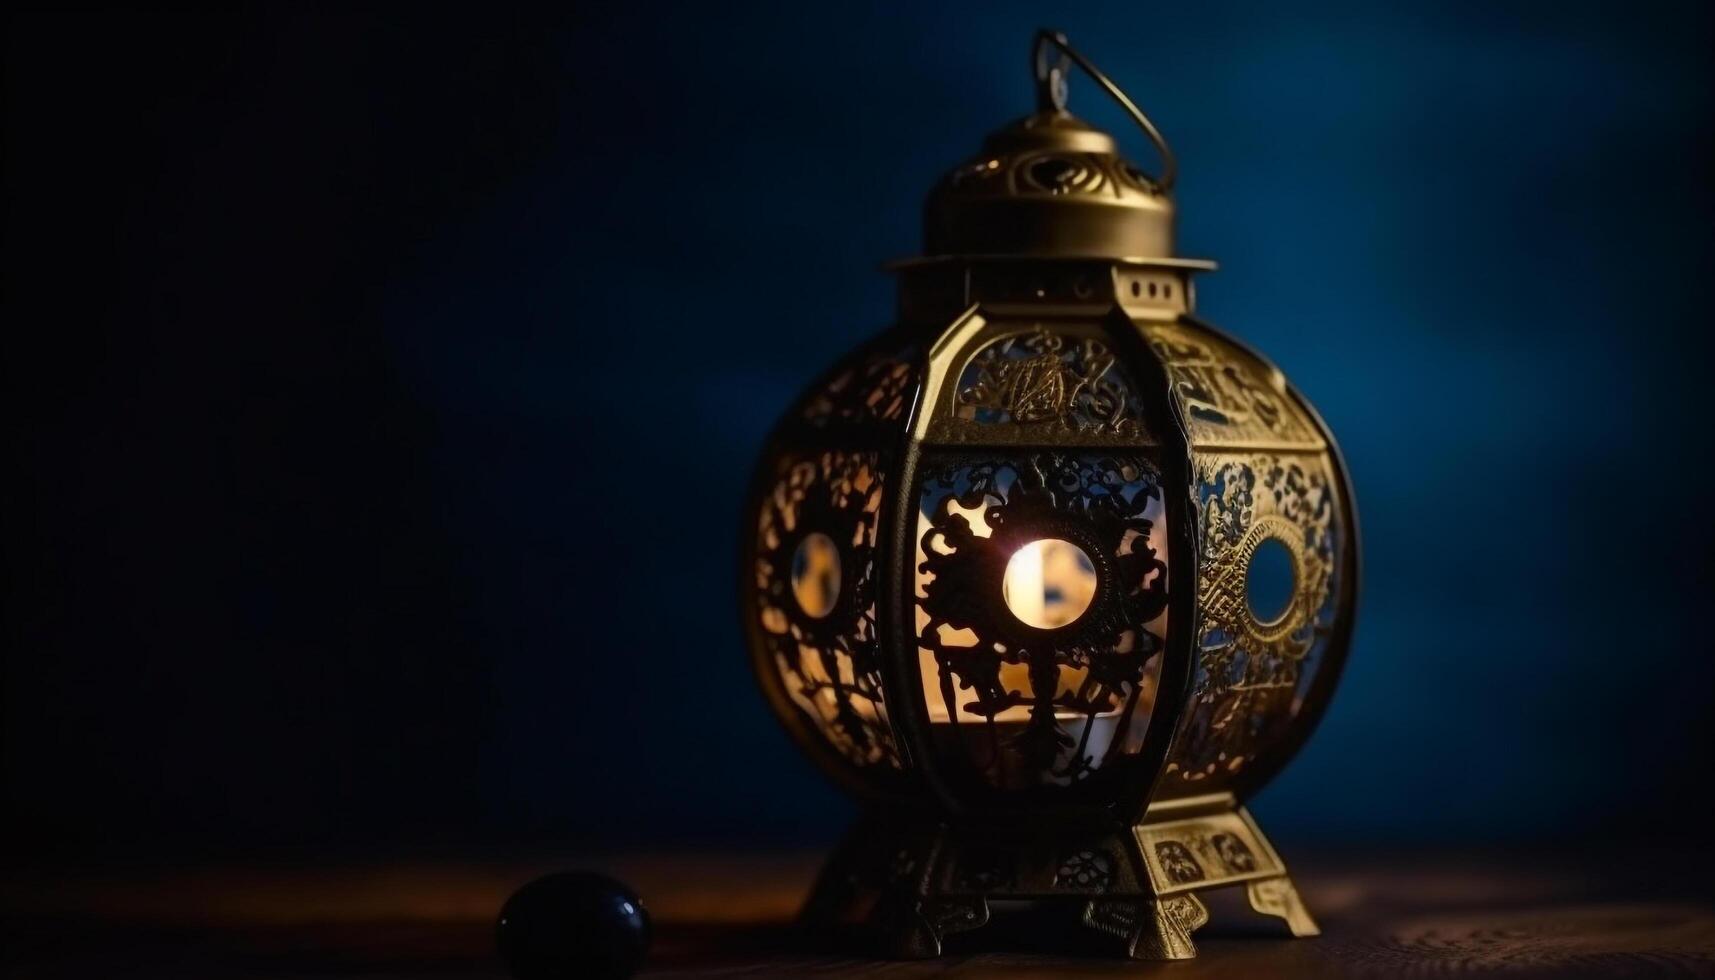 Antique lantern illuminated with candle, symbol of traditional spirituality generated by AI photo